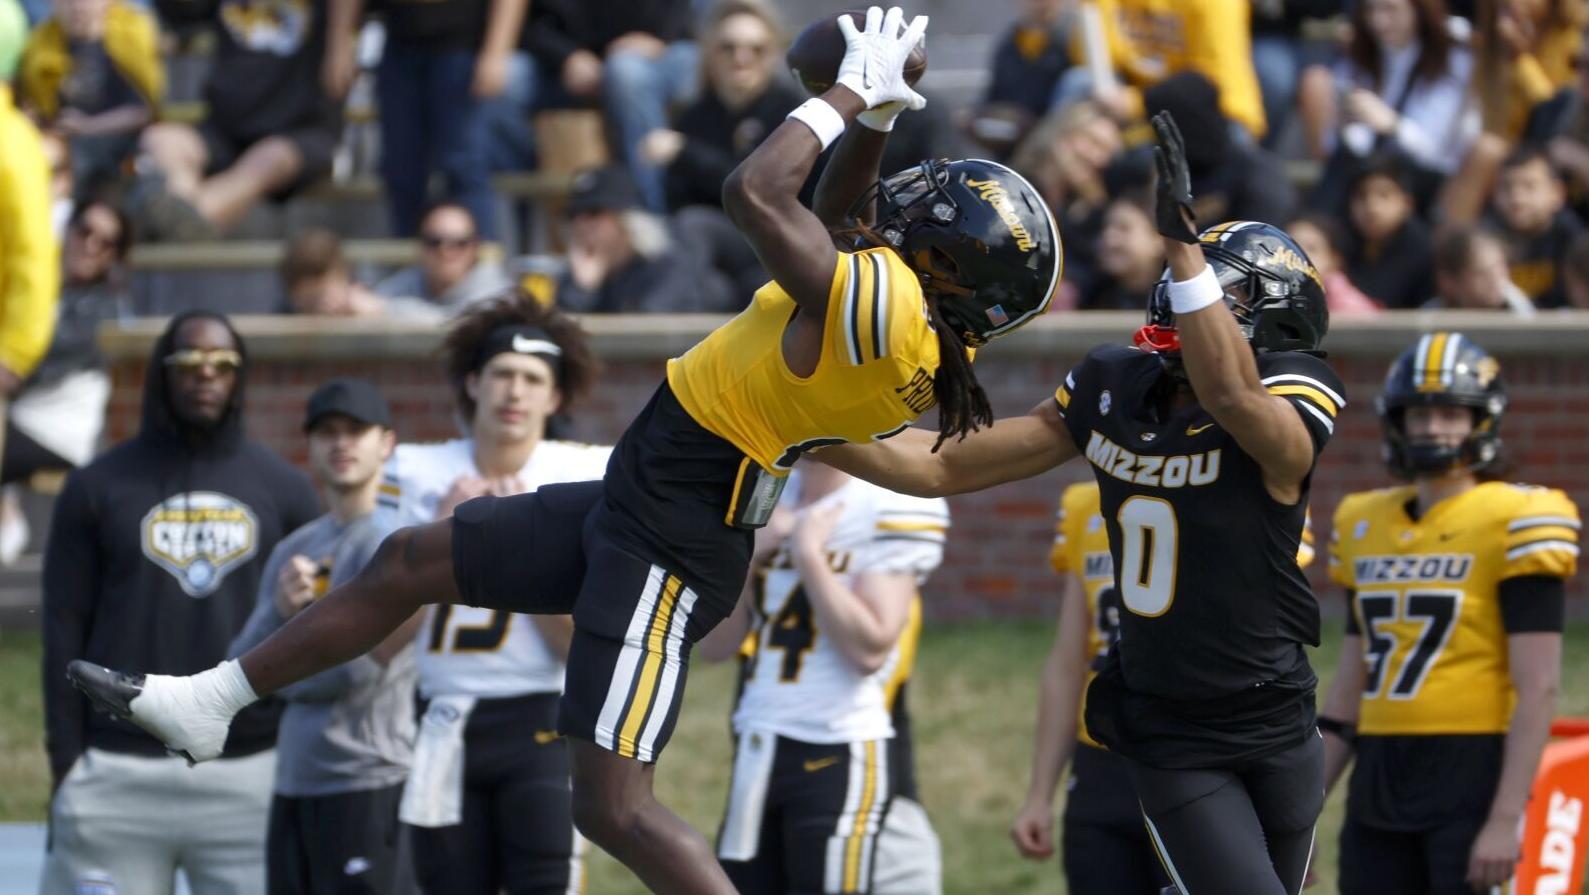 Mizzou spring game observations: Trick plays, cornerback impressions, wind challenges punters